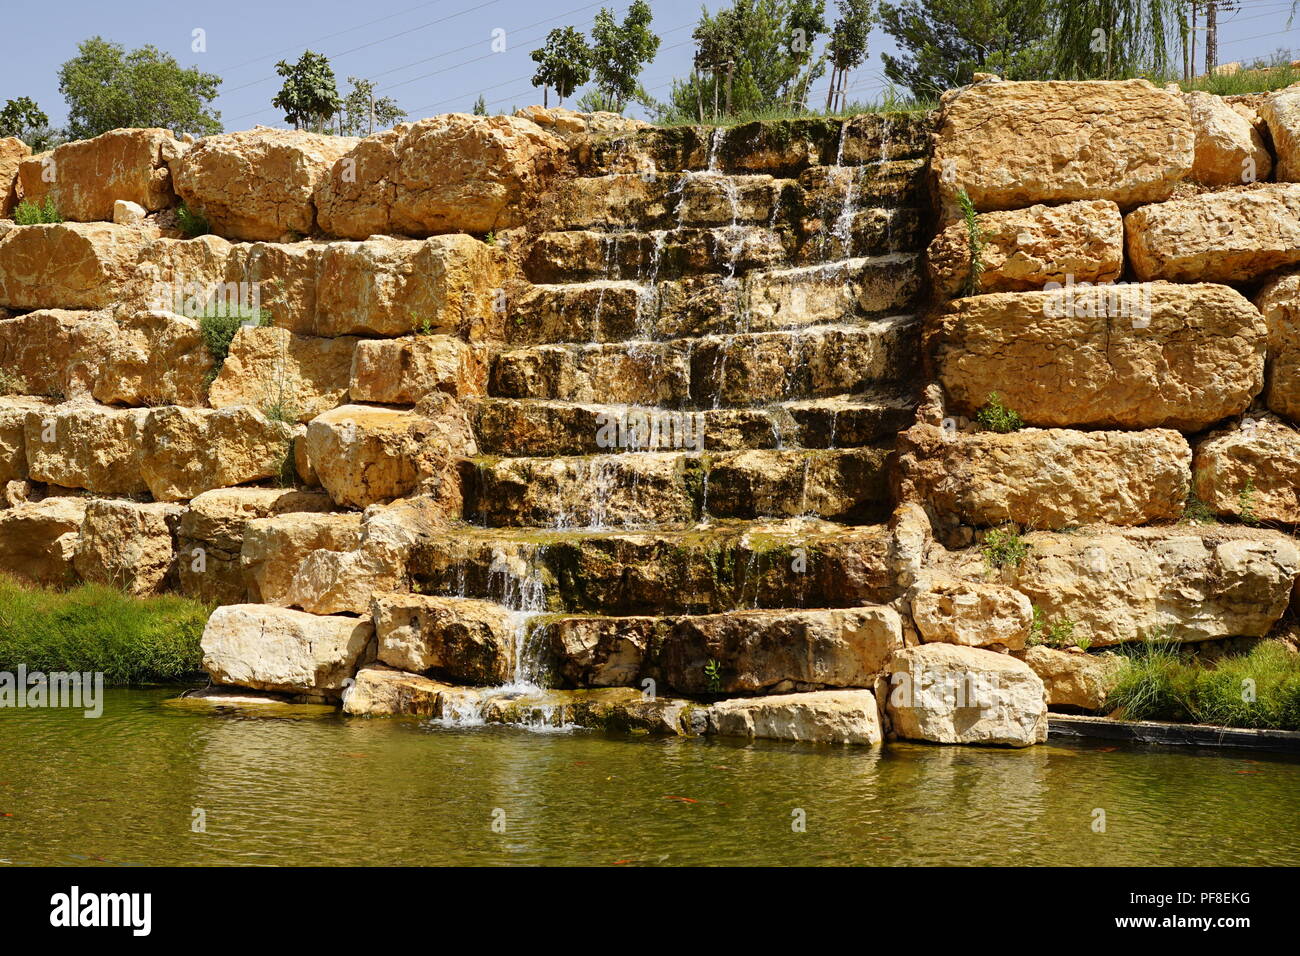 Artificial ornamental waterfall in a manmade park Stock Photo